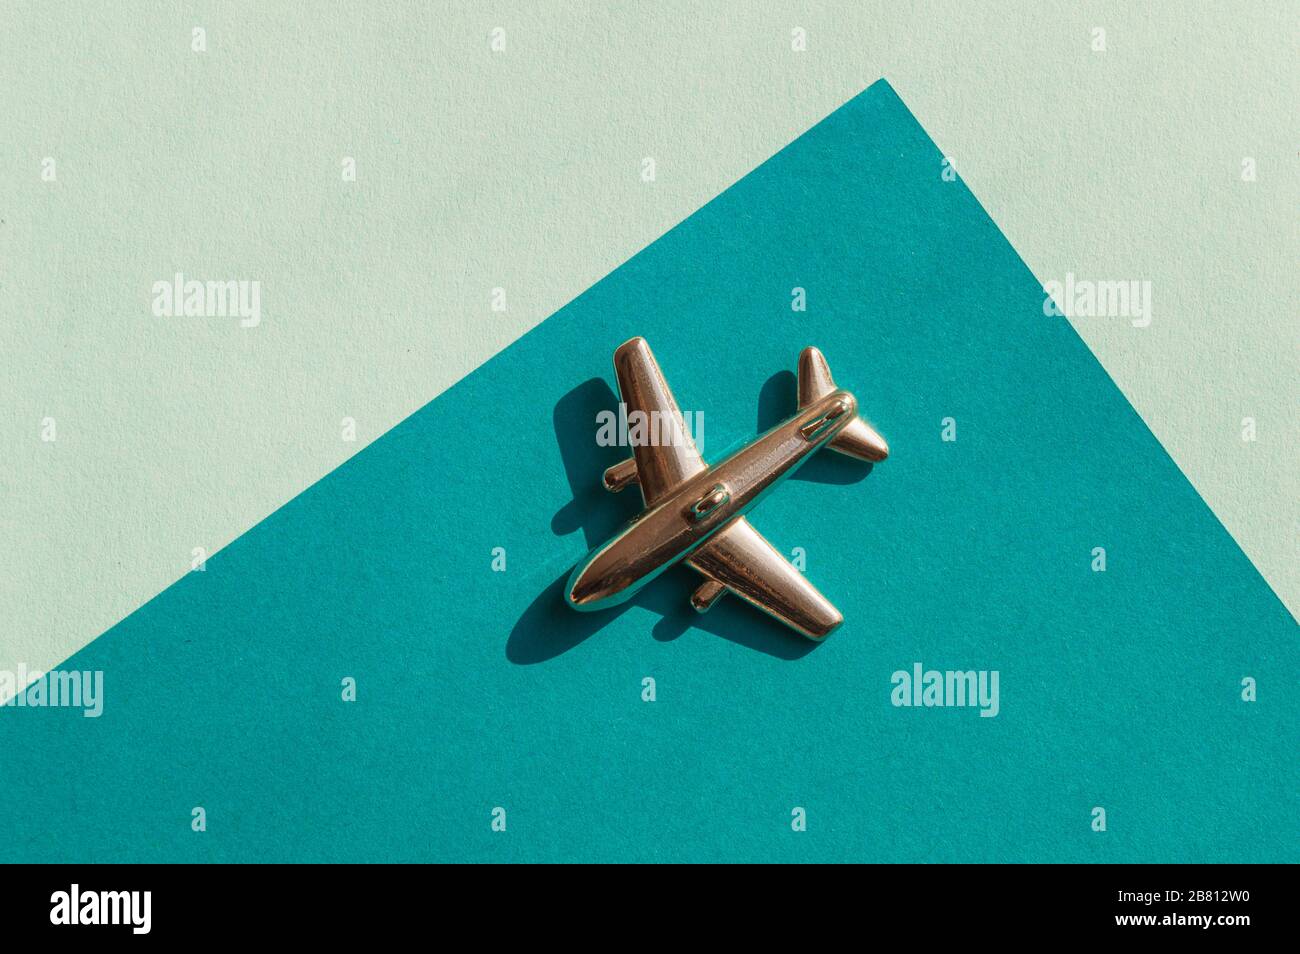 Metal figure of small airplane on the turqouise and light blue geometry background. Flatlay, top view, layout. Aviation industry Stock Photo